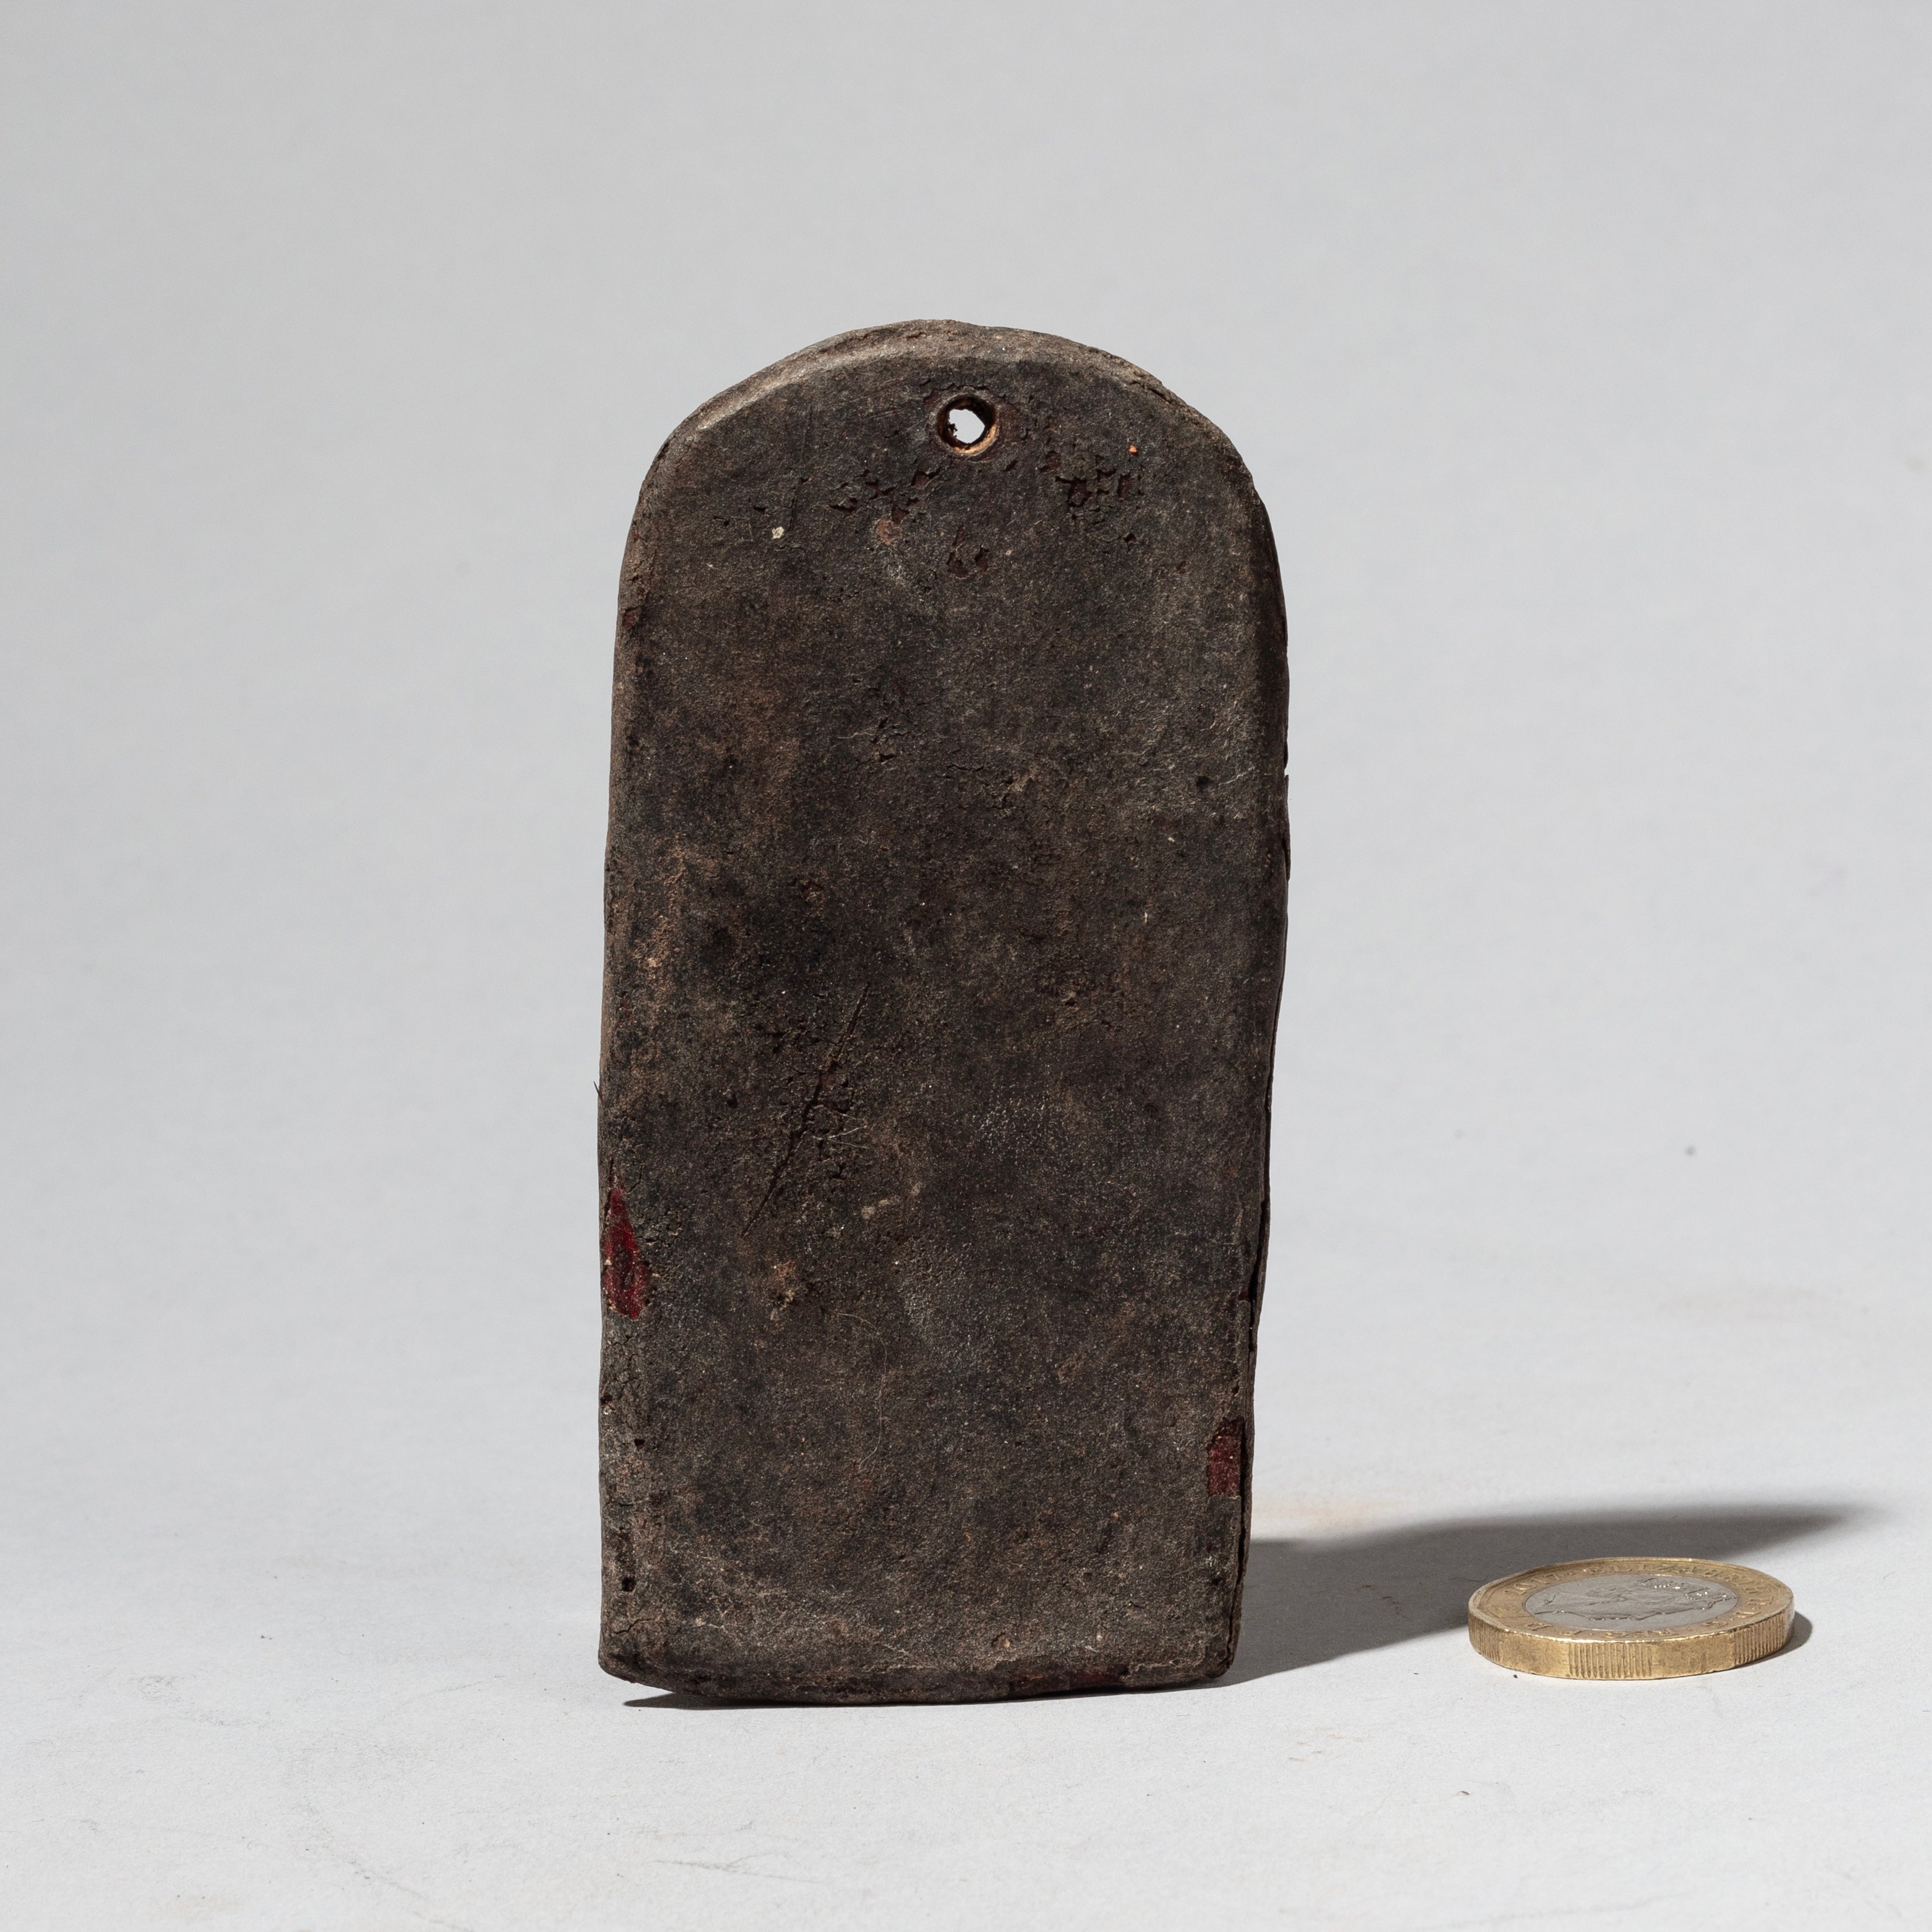 A SMALL TIVE LEATHER-AND WOOD PENDANT( No 2271)